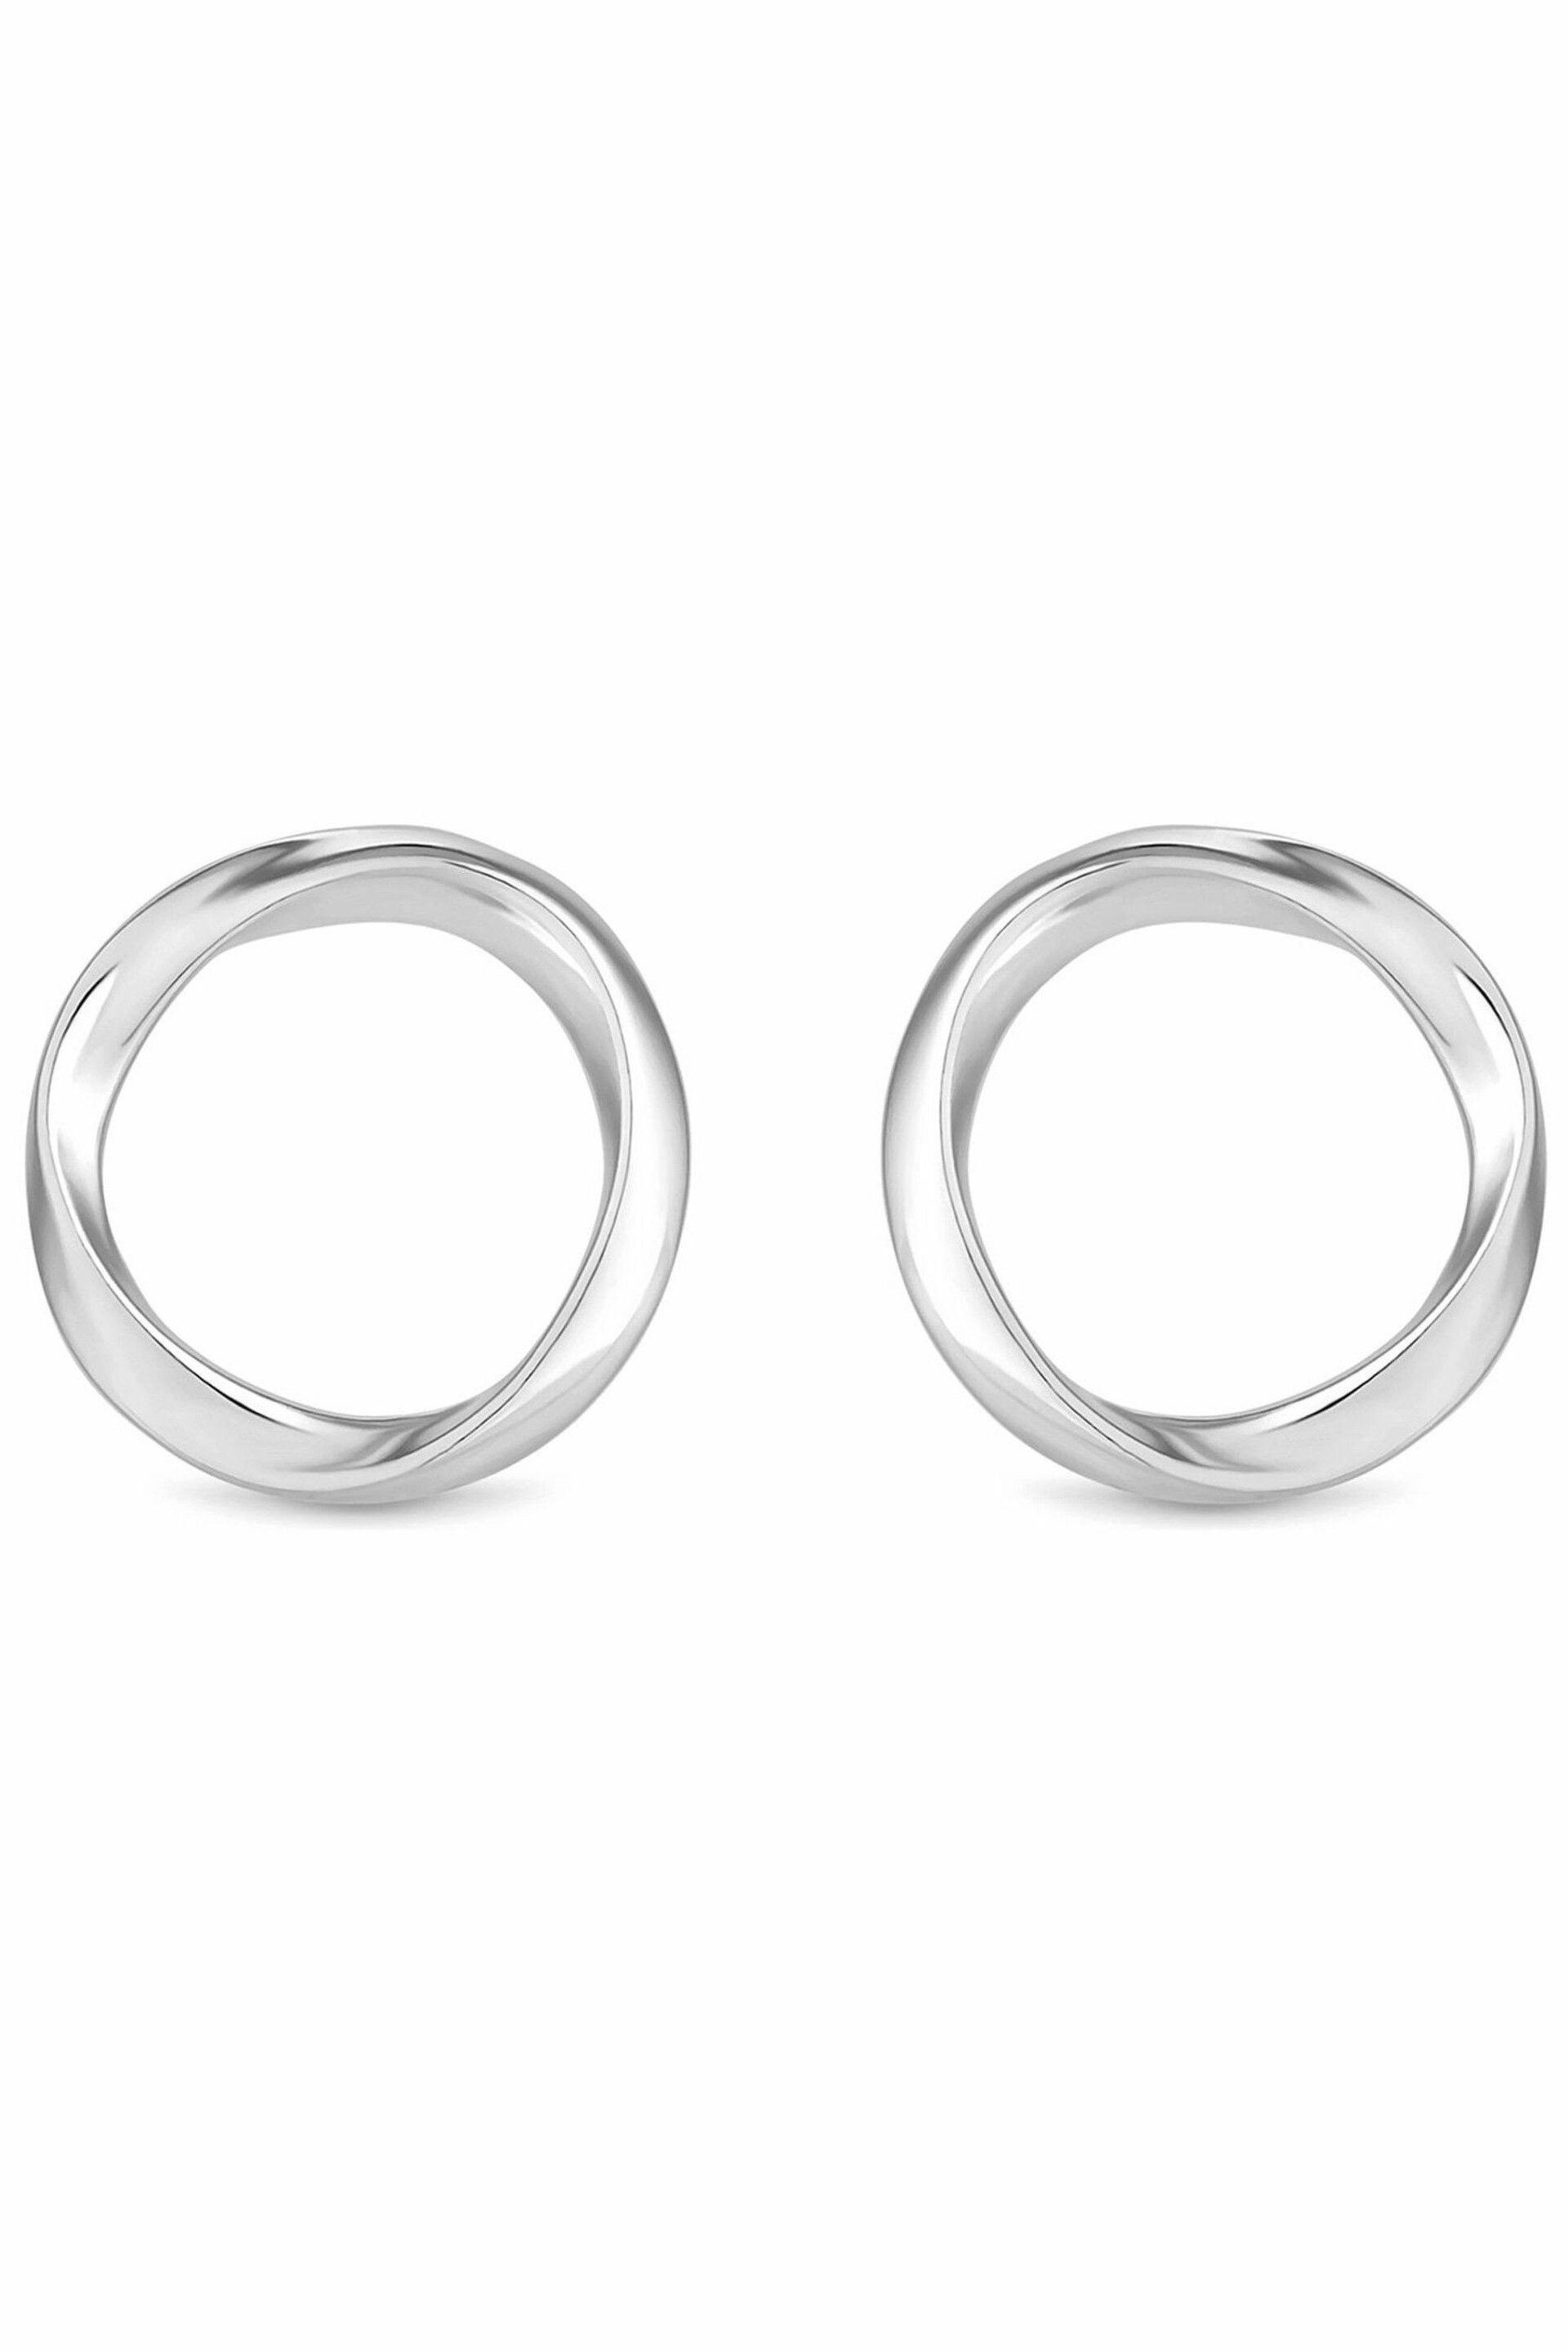 Simply Silver Silver Polished Open Circle Earrings - Image 3 of 3